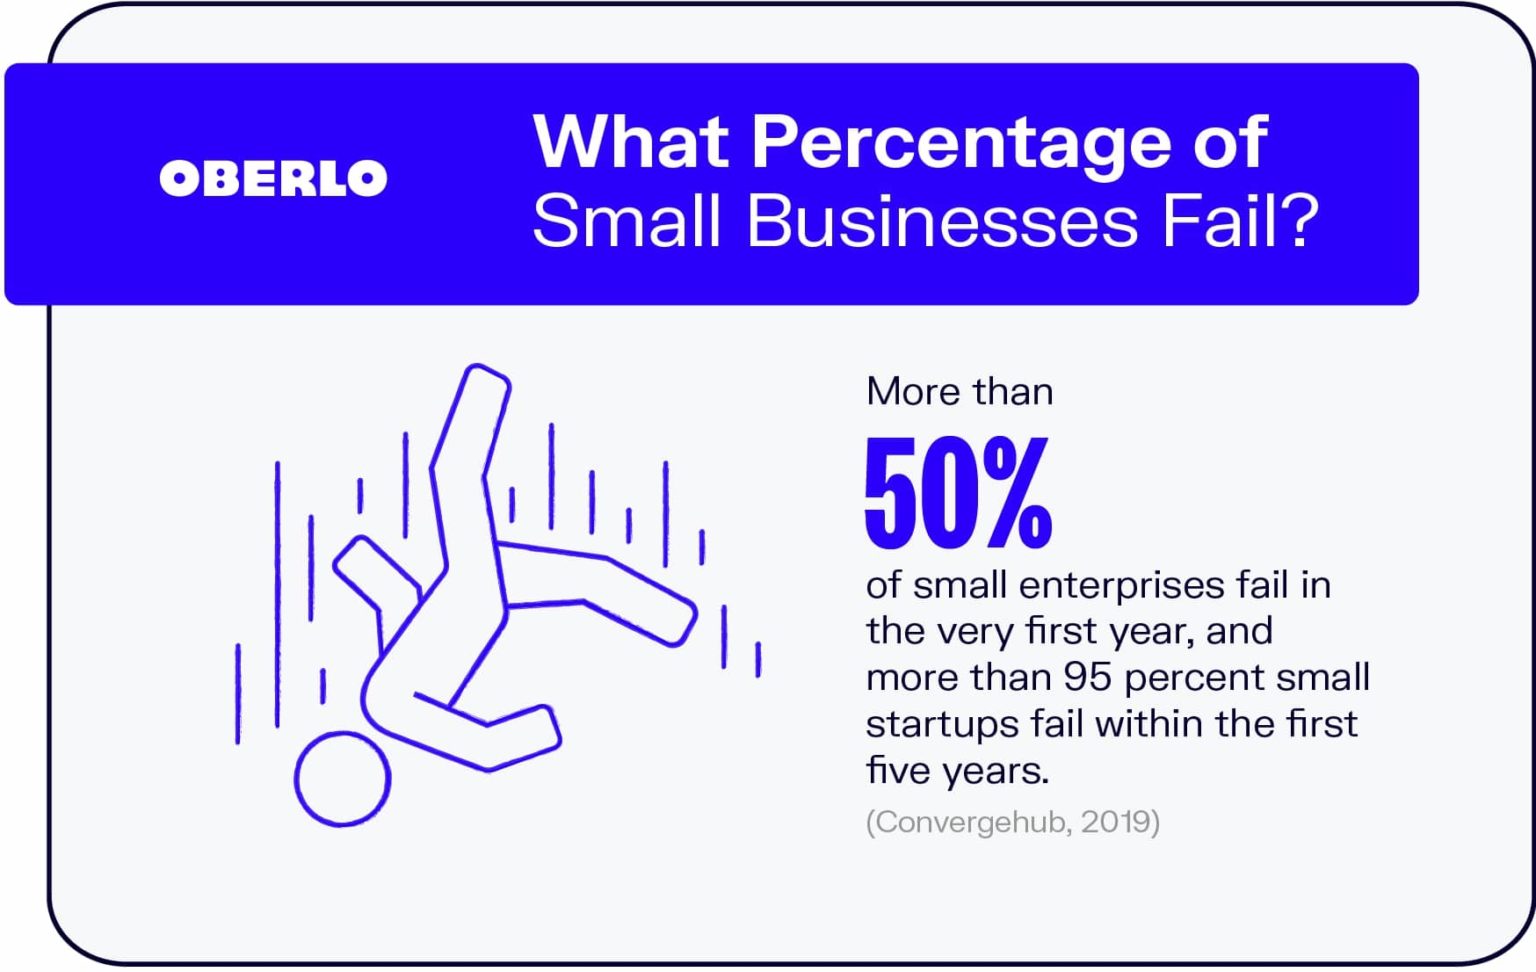 Percentage of Small Businesses that Fail